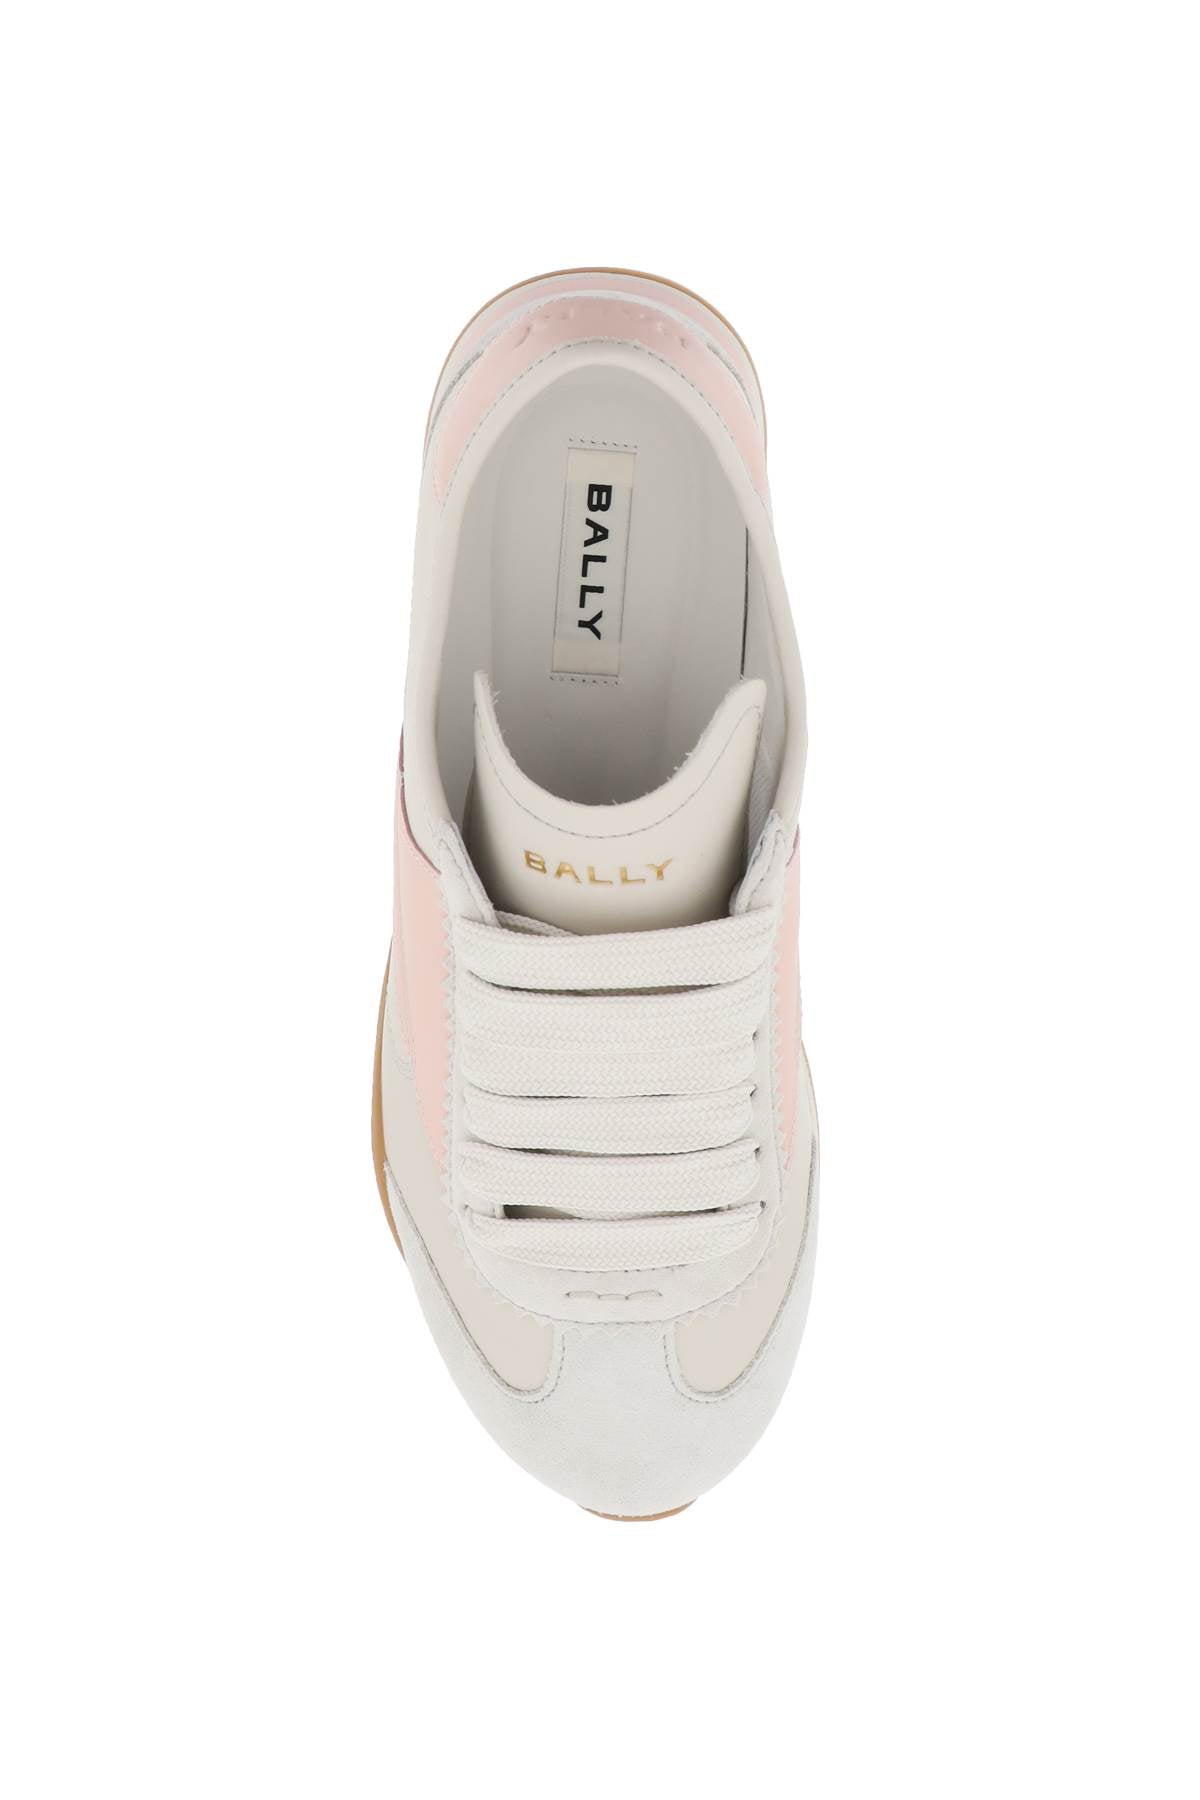 Bally Leather Sonney Sneakers-Bally-Urbanheer